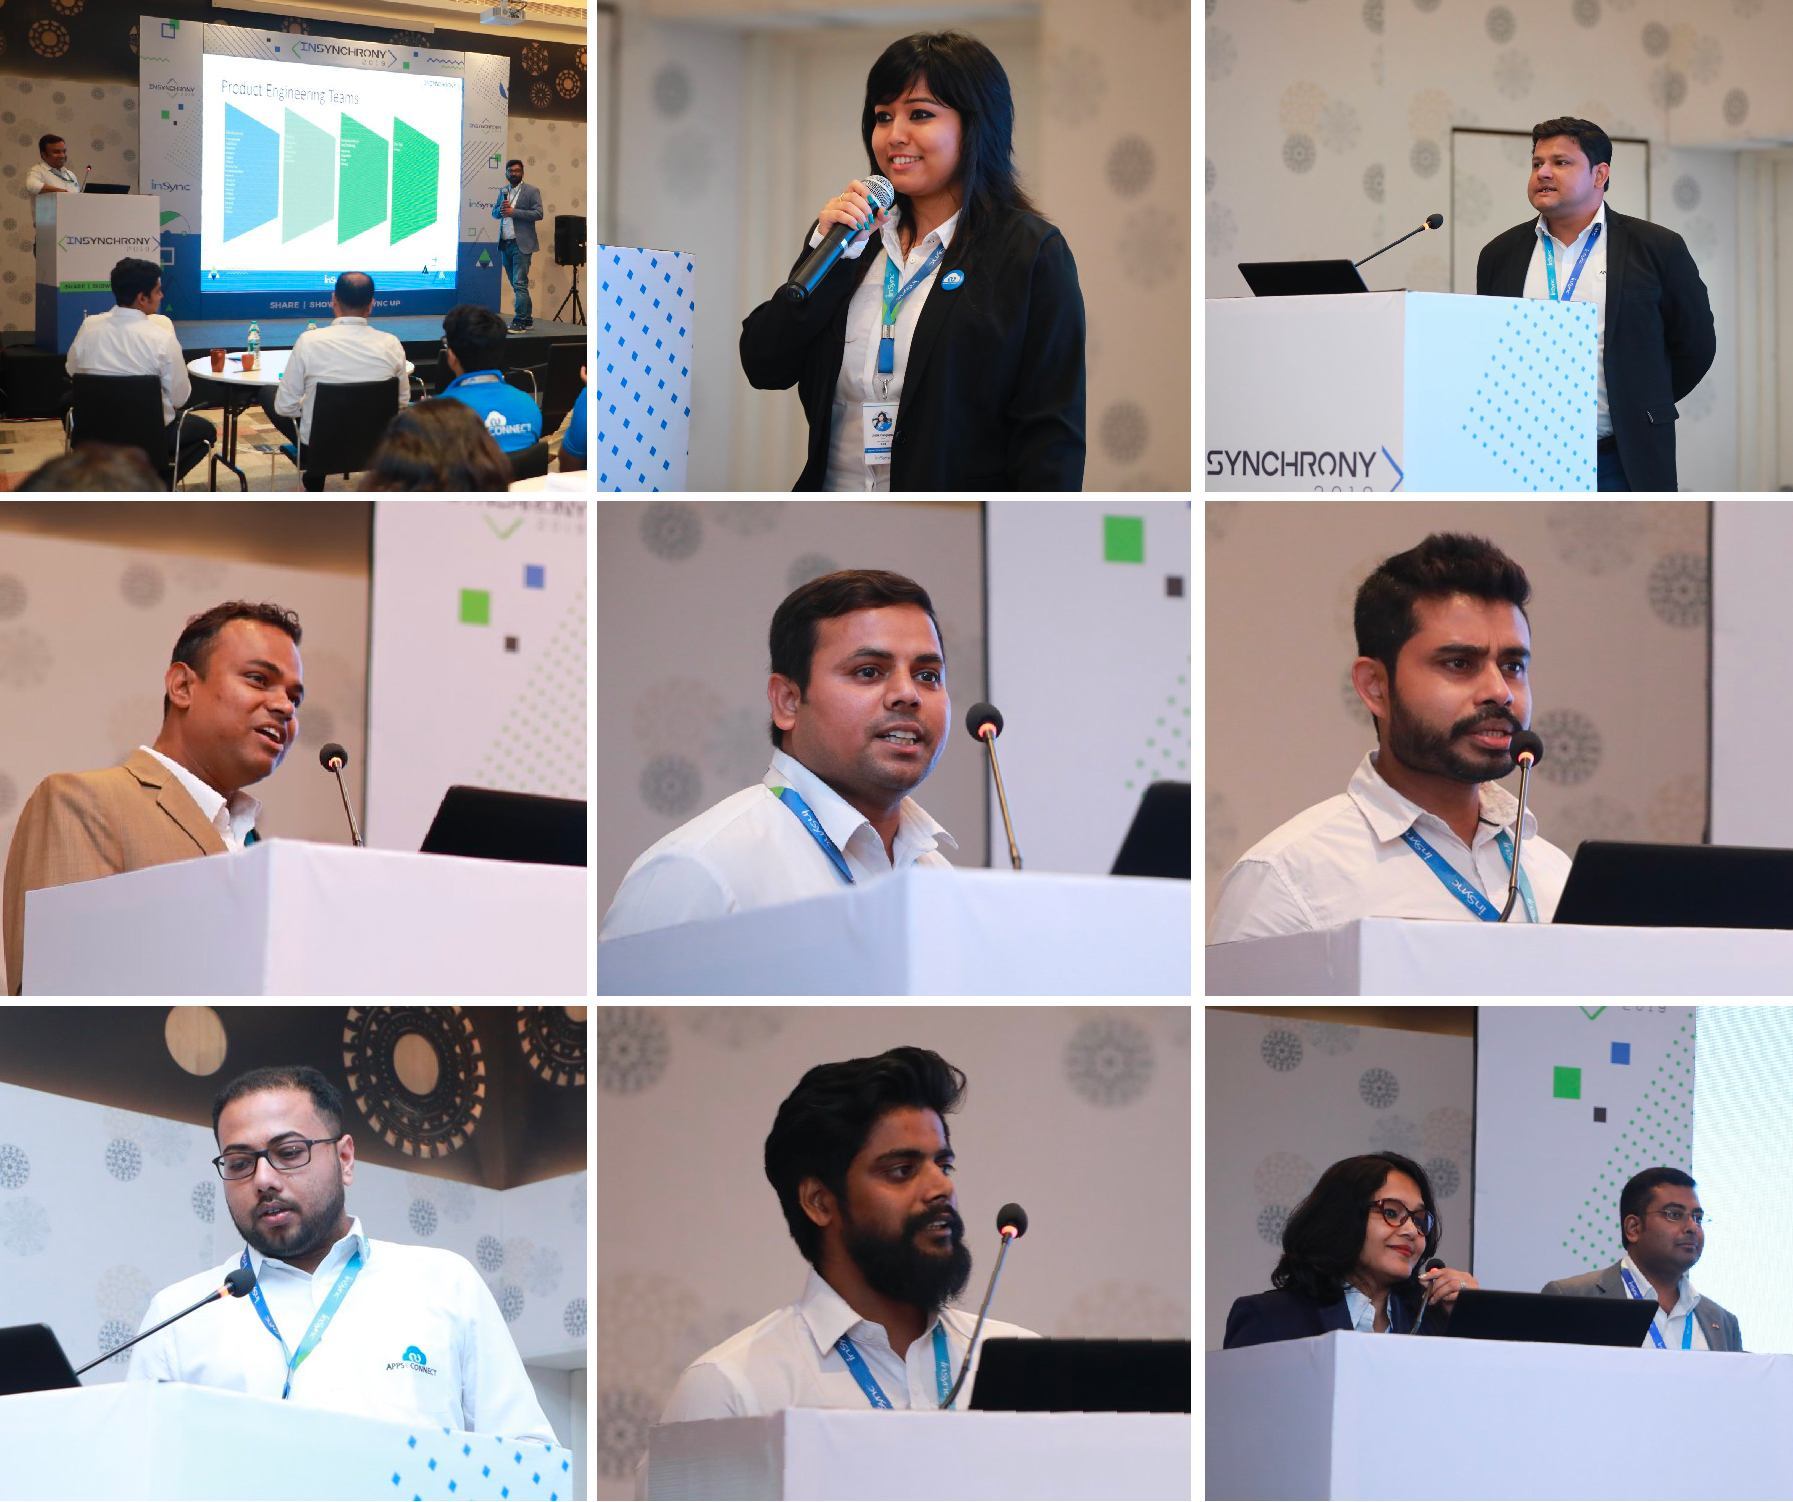 dashboard-presentations-by-various-departments-at-InSynchrony-2019